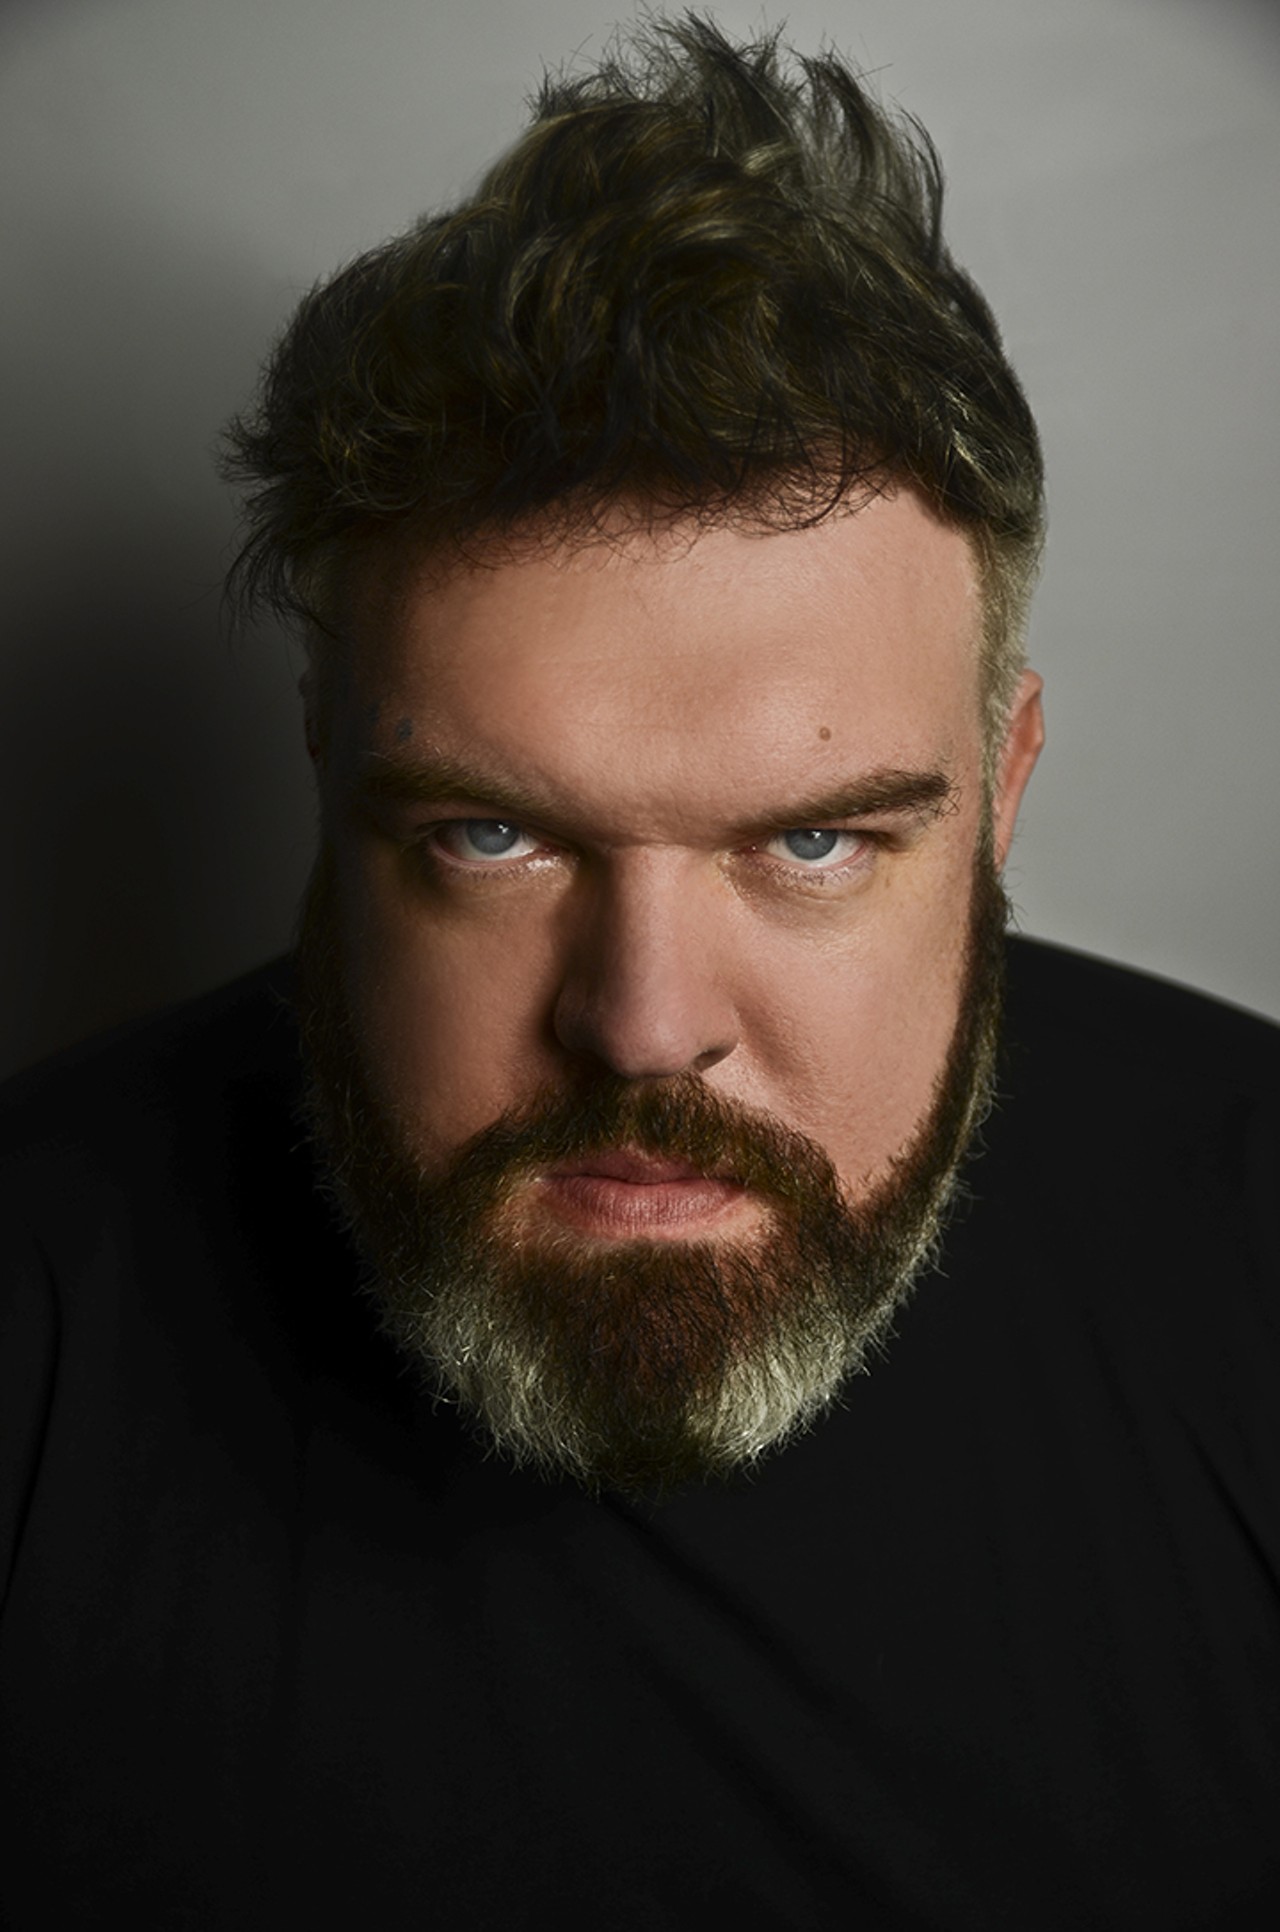 Thursday, Nov. 10Rave of Thrones with Kristian Nairn at Venue 578